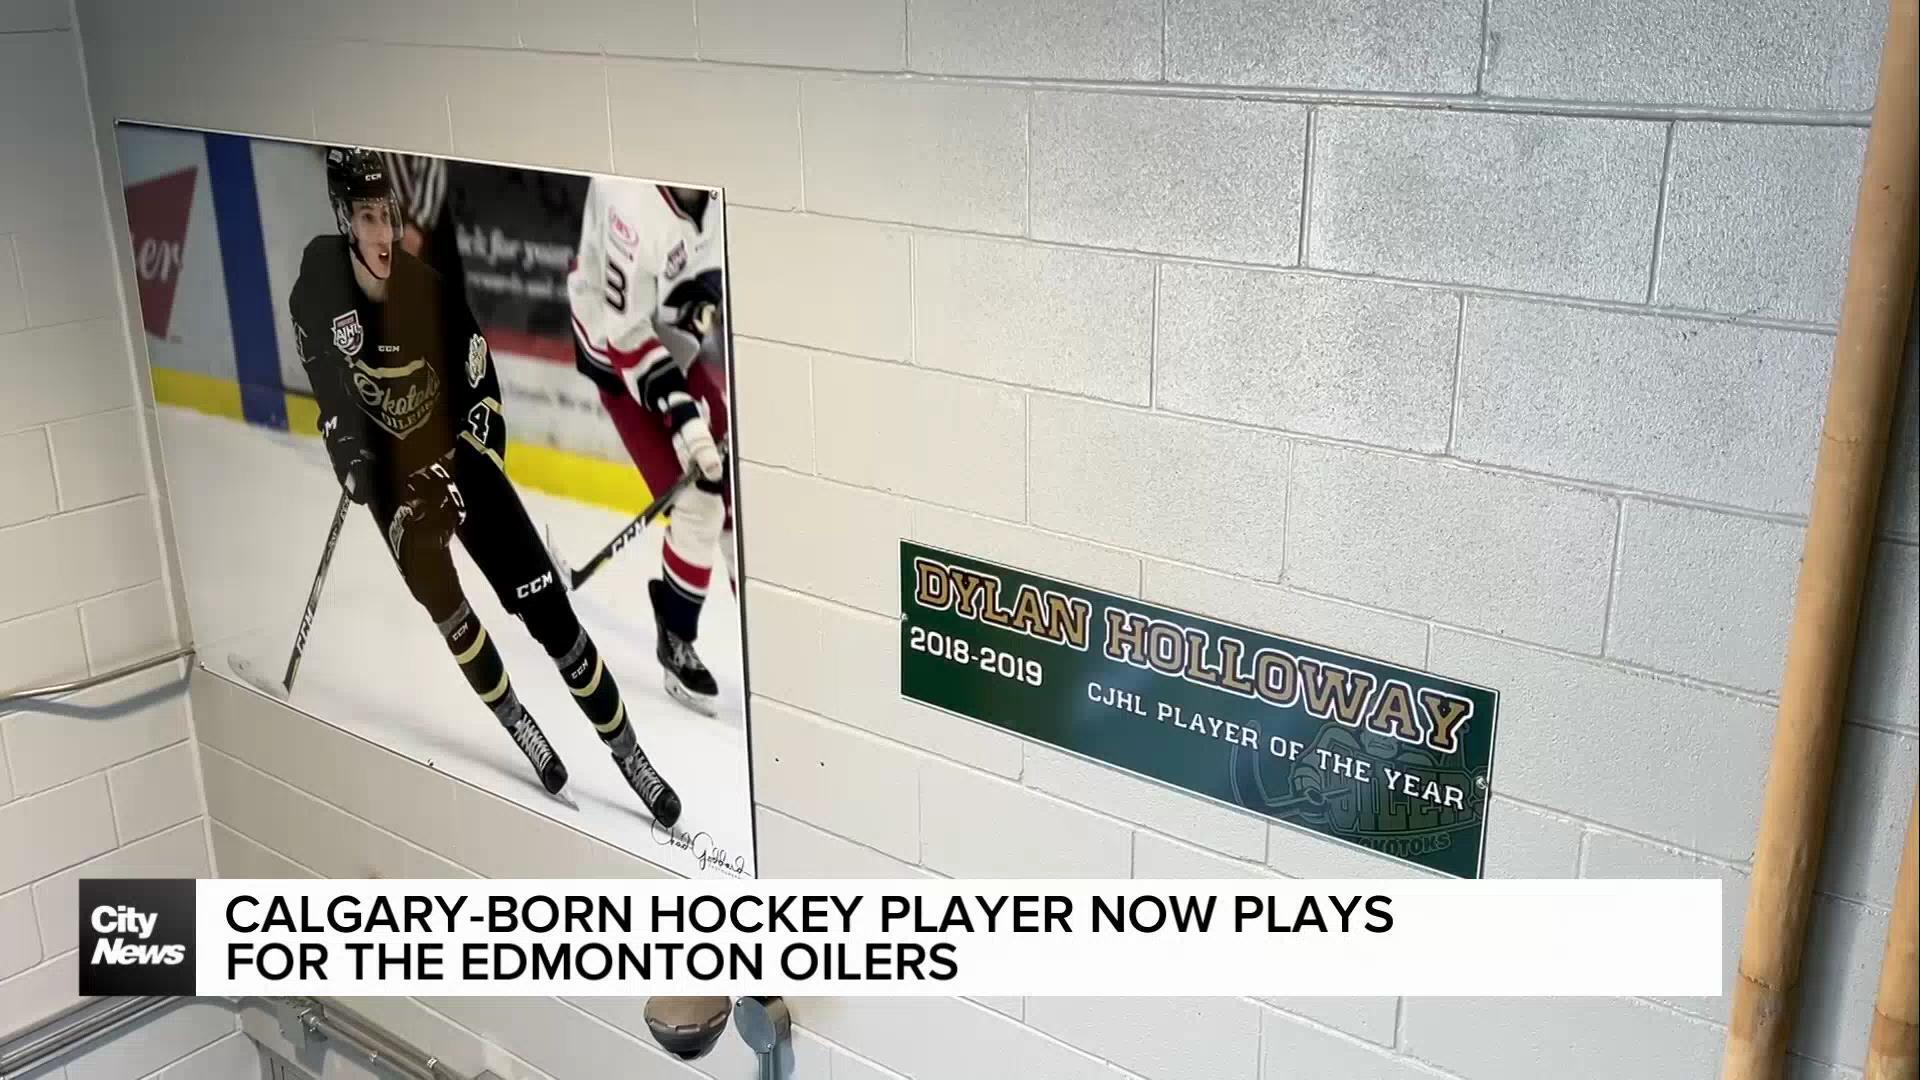 Calgary-born hockey player now plays for the Oilers